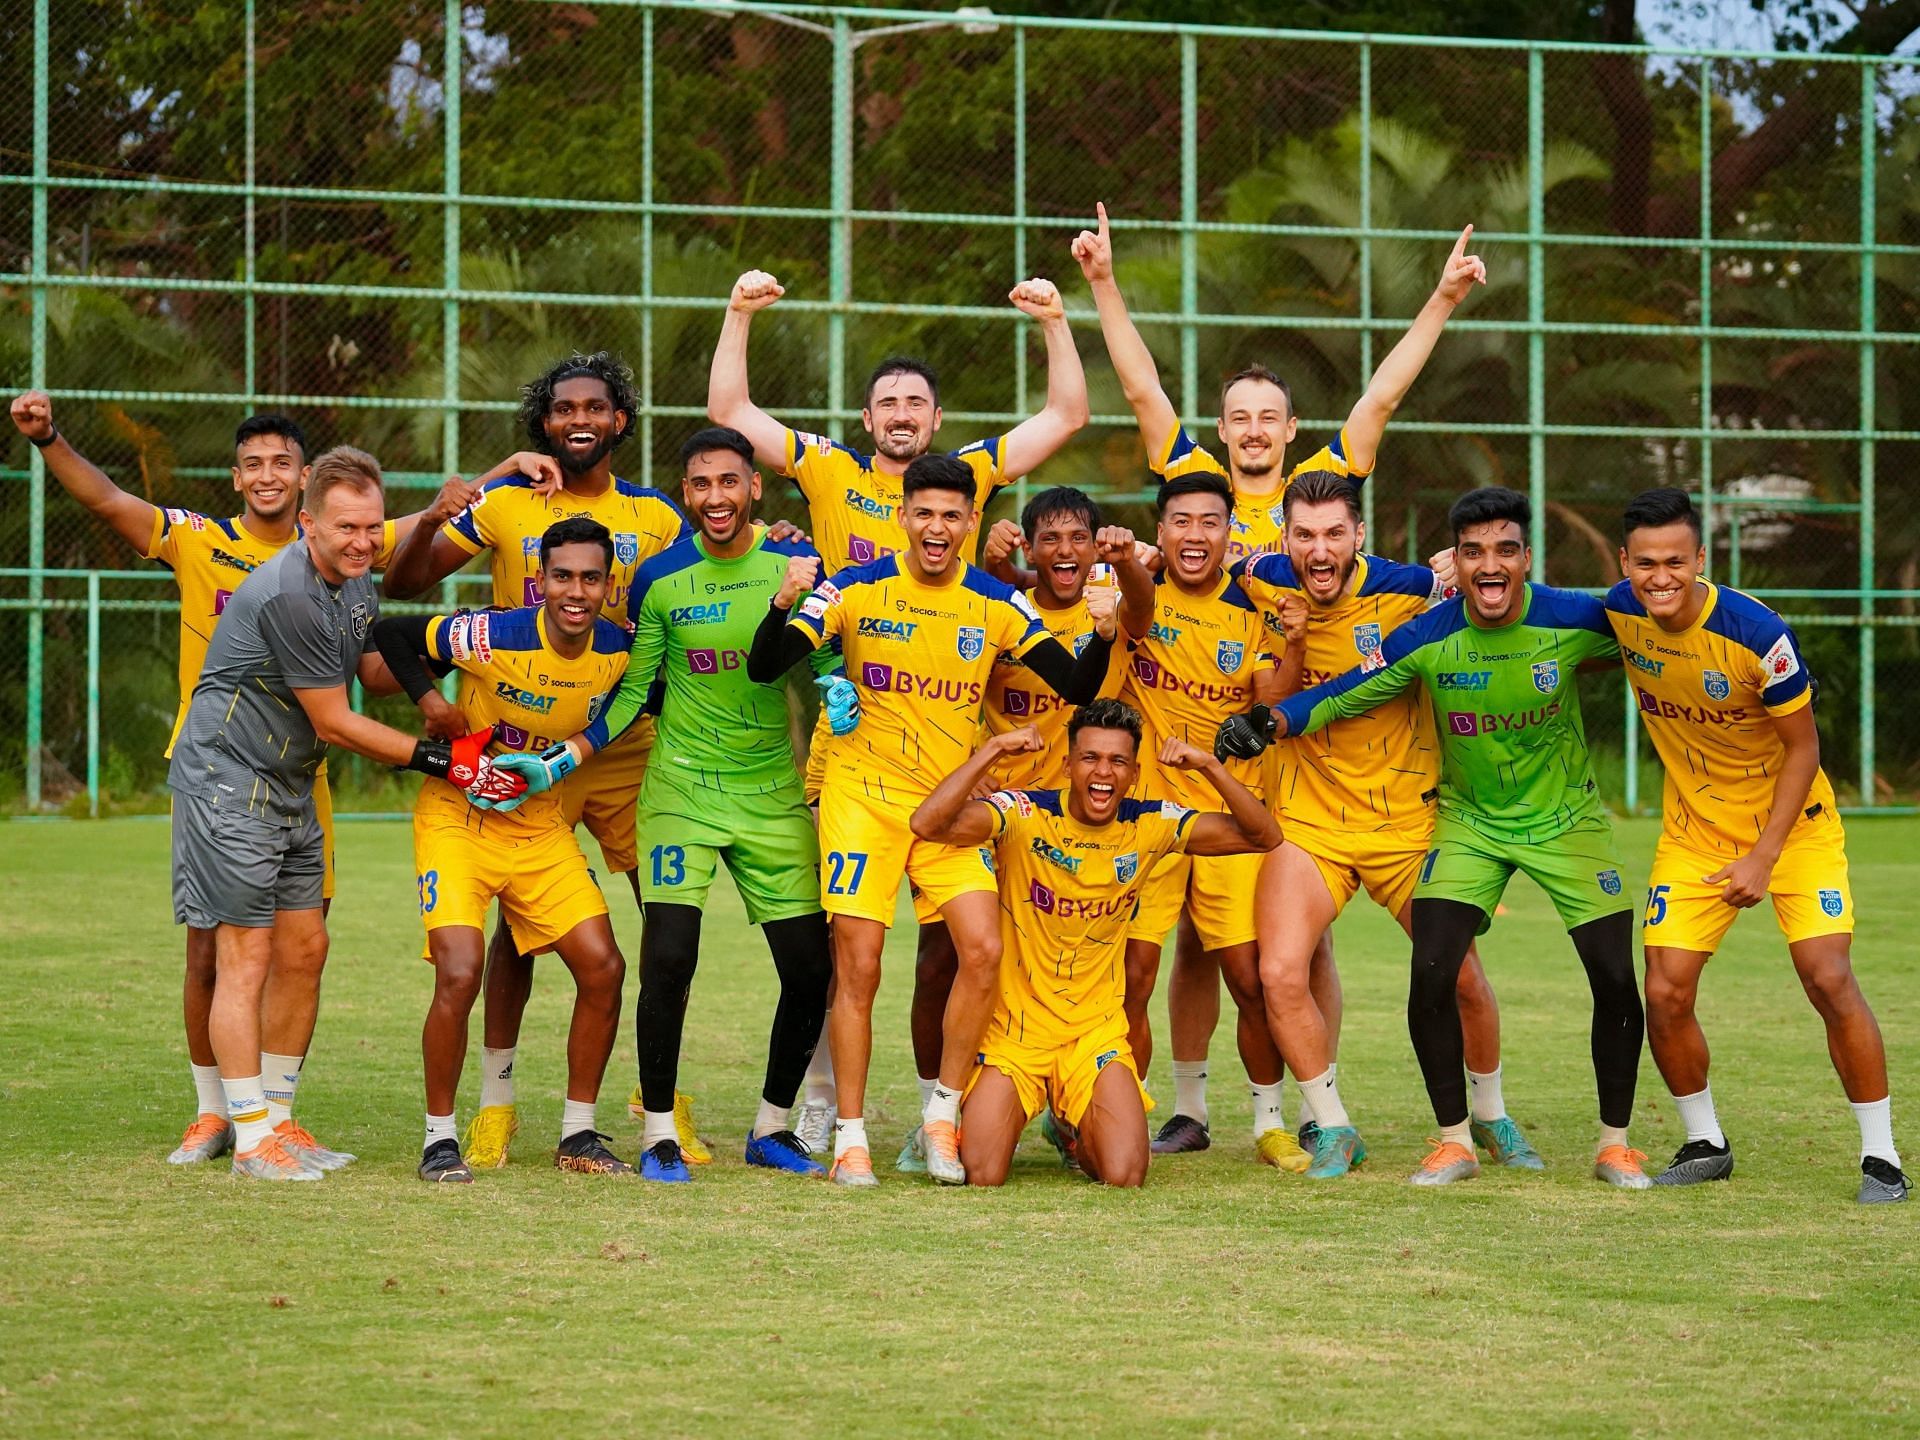 Kerala Blasters FC players during their training session ahead of the RoundGlass Punjab FC clash.